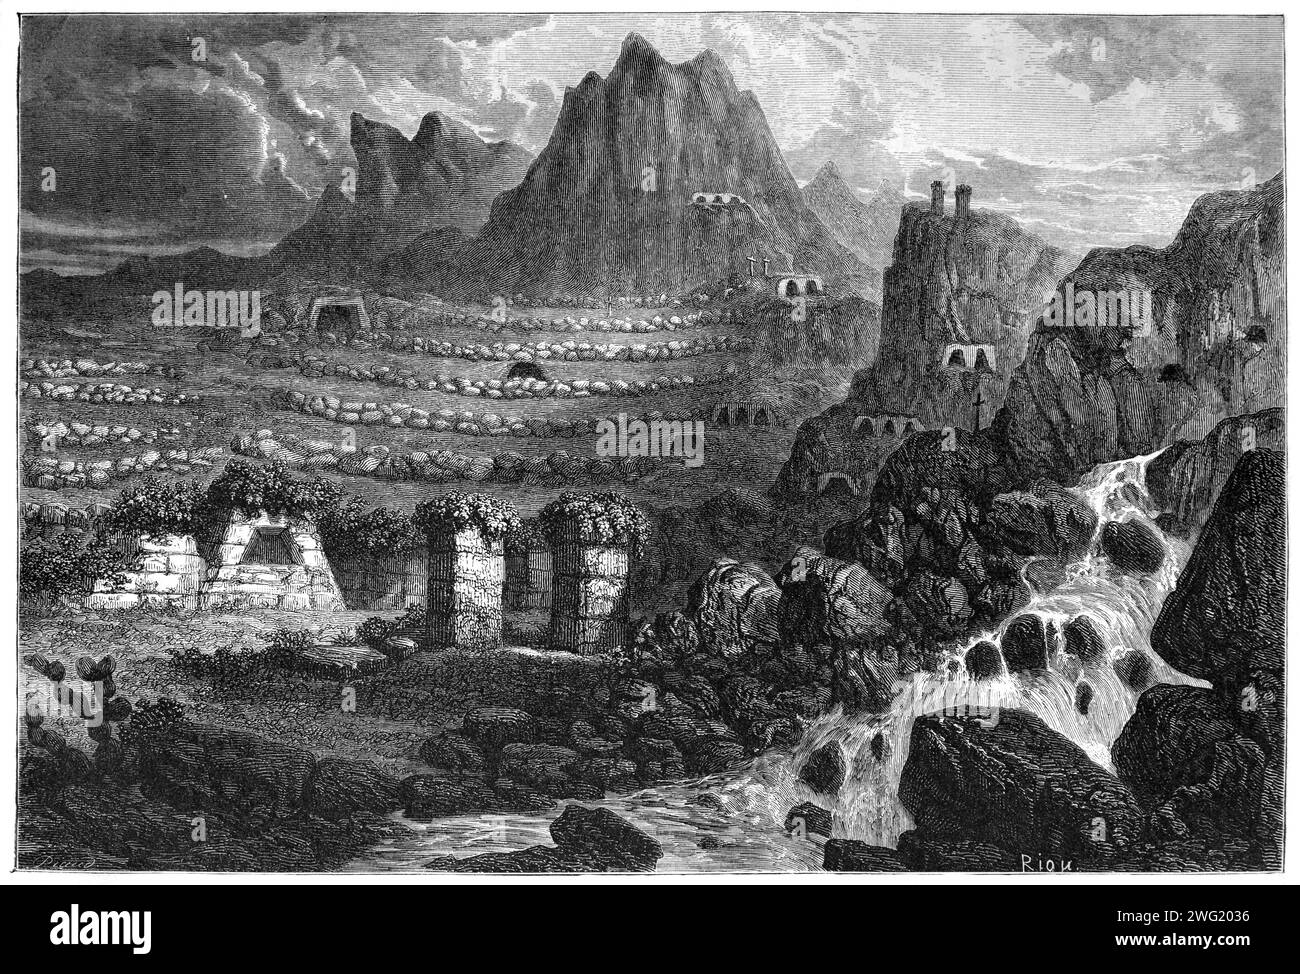 Panorama or Panoramic View of the Ancient Inca Stone Quarries, Inca Ruins and Archaeological Site of Ollantaytambo or Ollantay Tampu, Cusco Region, Peru. Vintage or Historic Engraving or Illustration 1863 Stock Photo